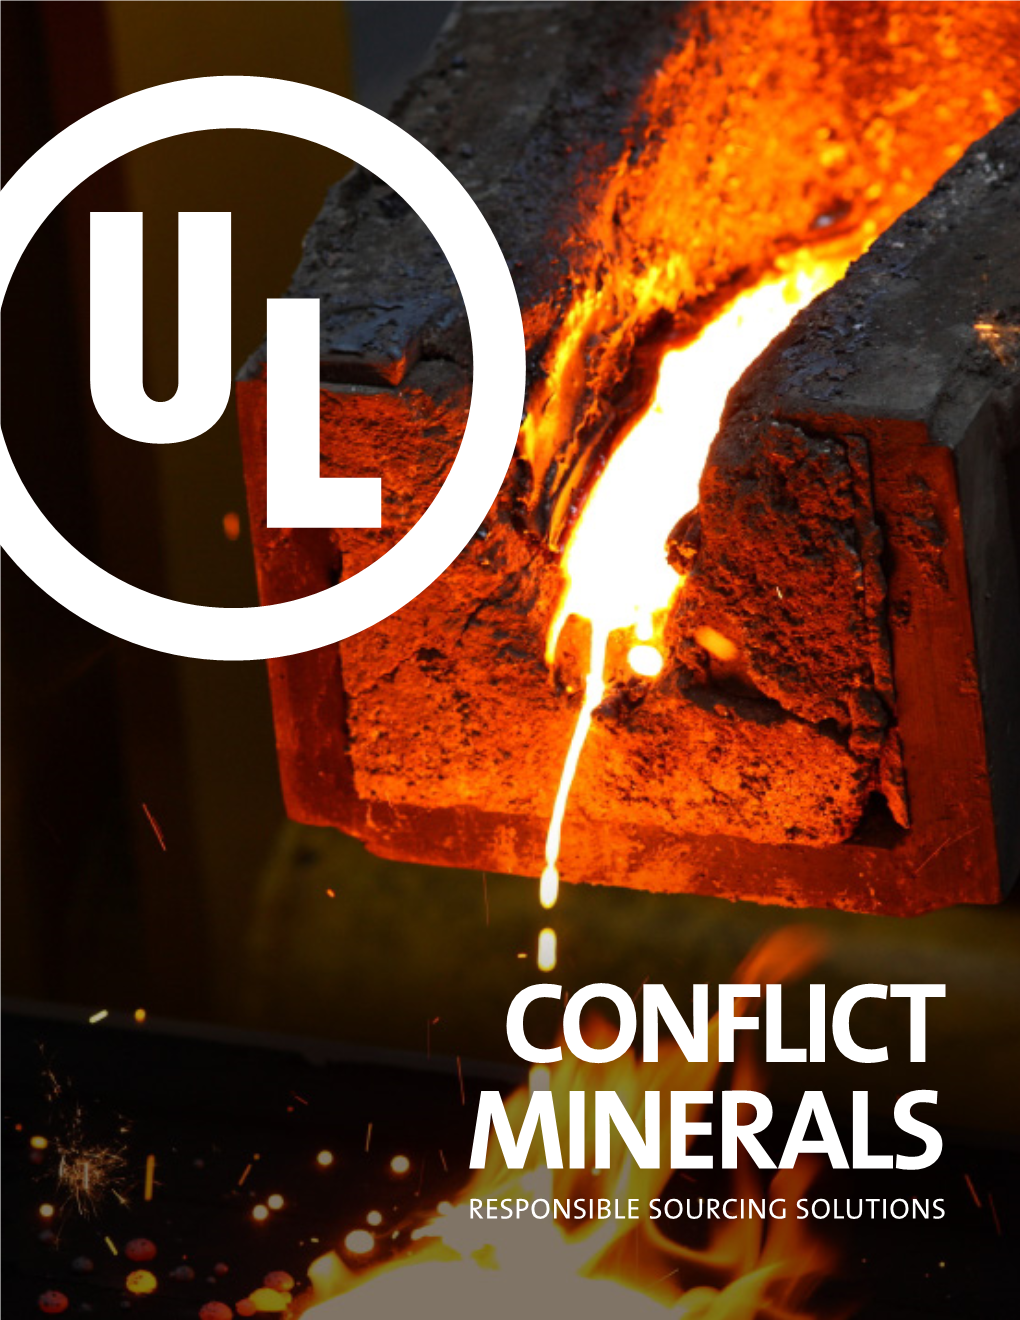 RESPONSIBLE SOURCING SOLUTIONS Conflict Minerals: Responsible Sourcing Solutions